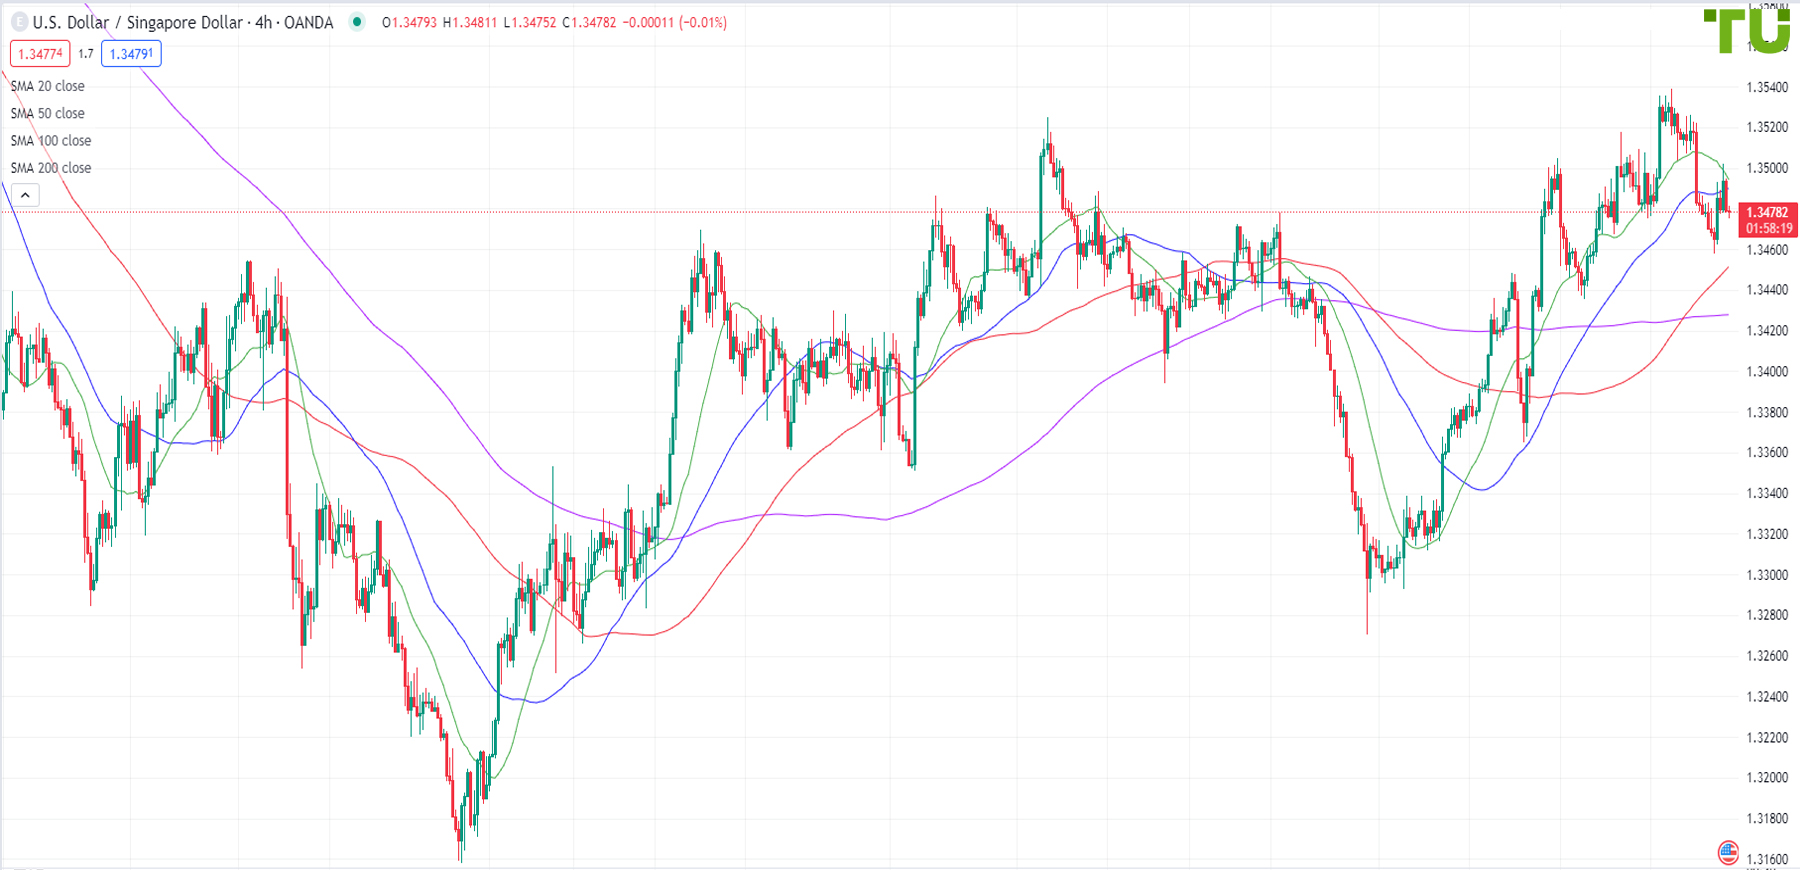 USD/SGD sold off from the 1.3500 resistance